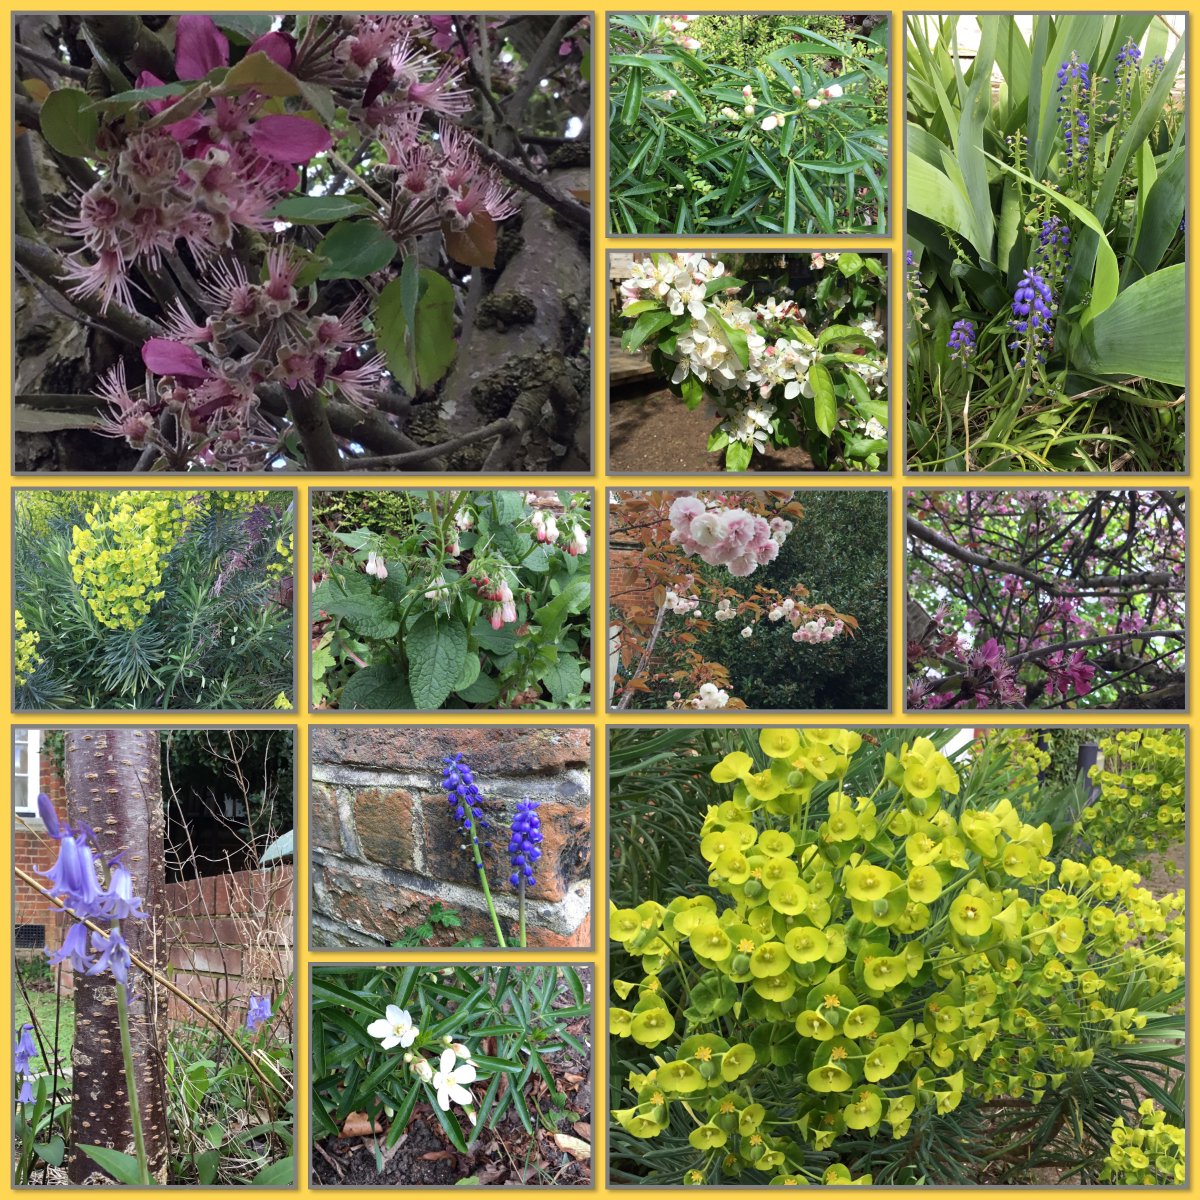 We have so many signs of spring in the garden at the minute and although the weather hasn't been great, hopefully we'll get some warmer weather soon!!
#signsofspring #warmerweatheriscoming #inspiringcuriosity #eyfs #comperschool #compernurseryschool #Outdoorplay